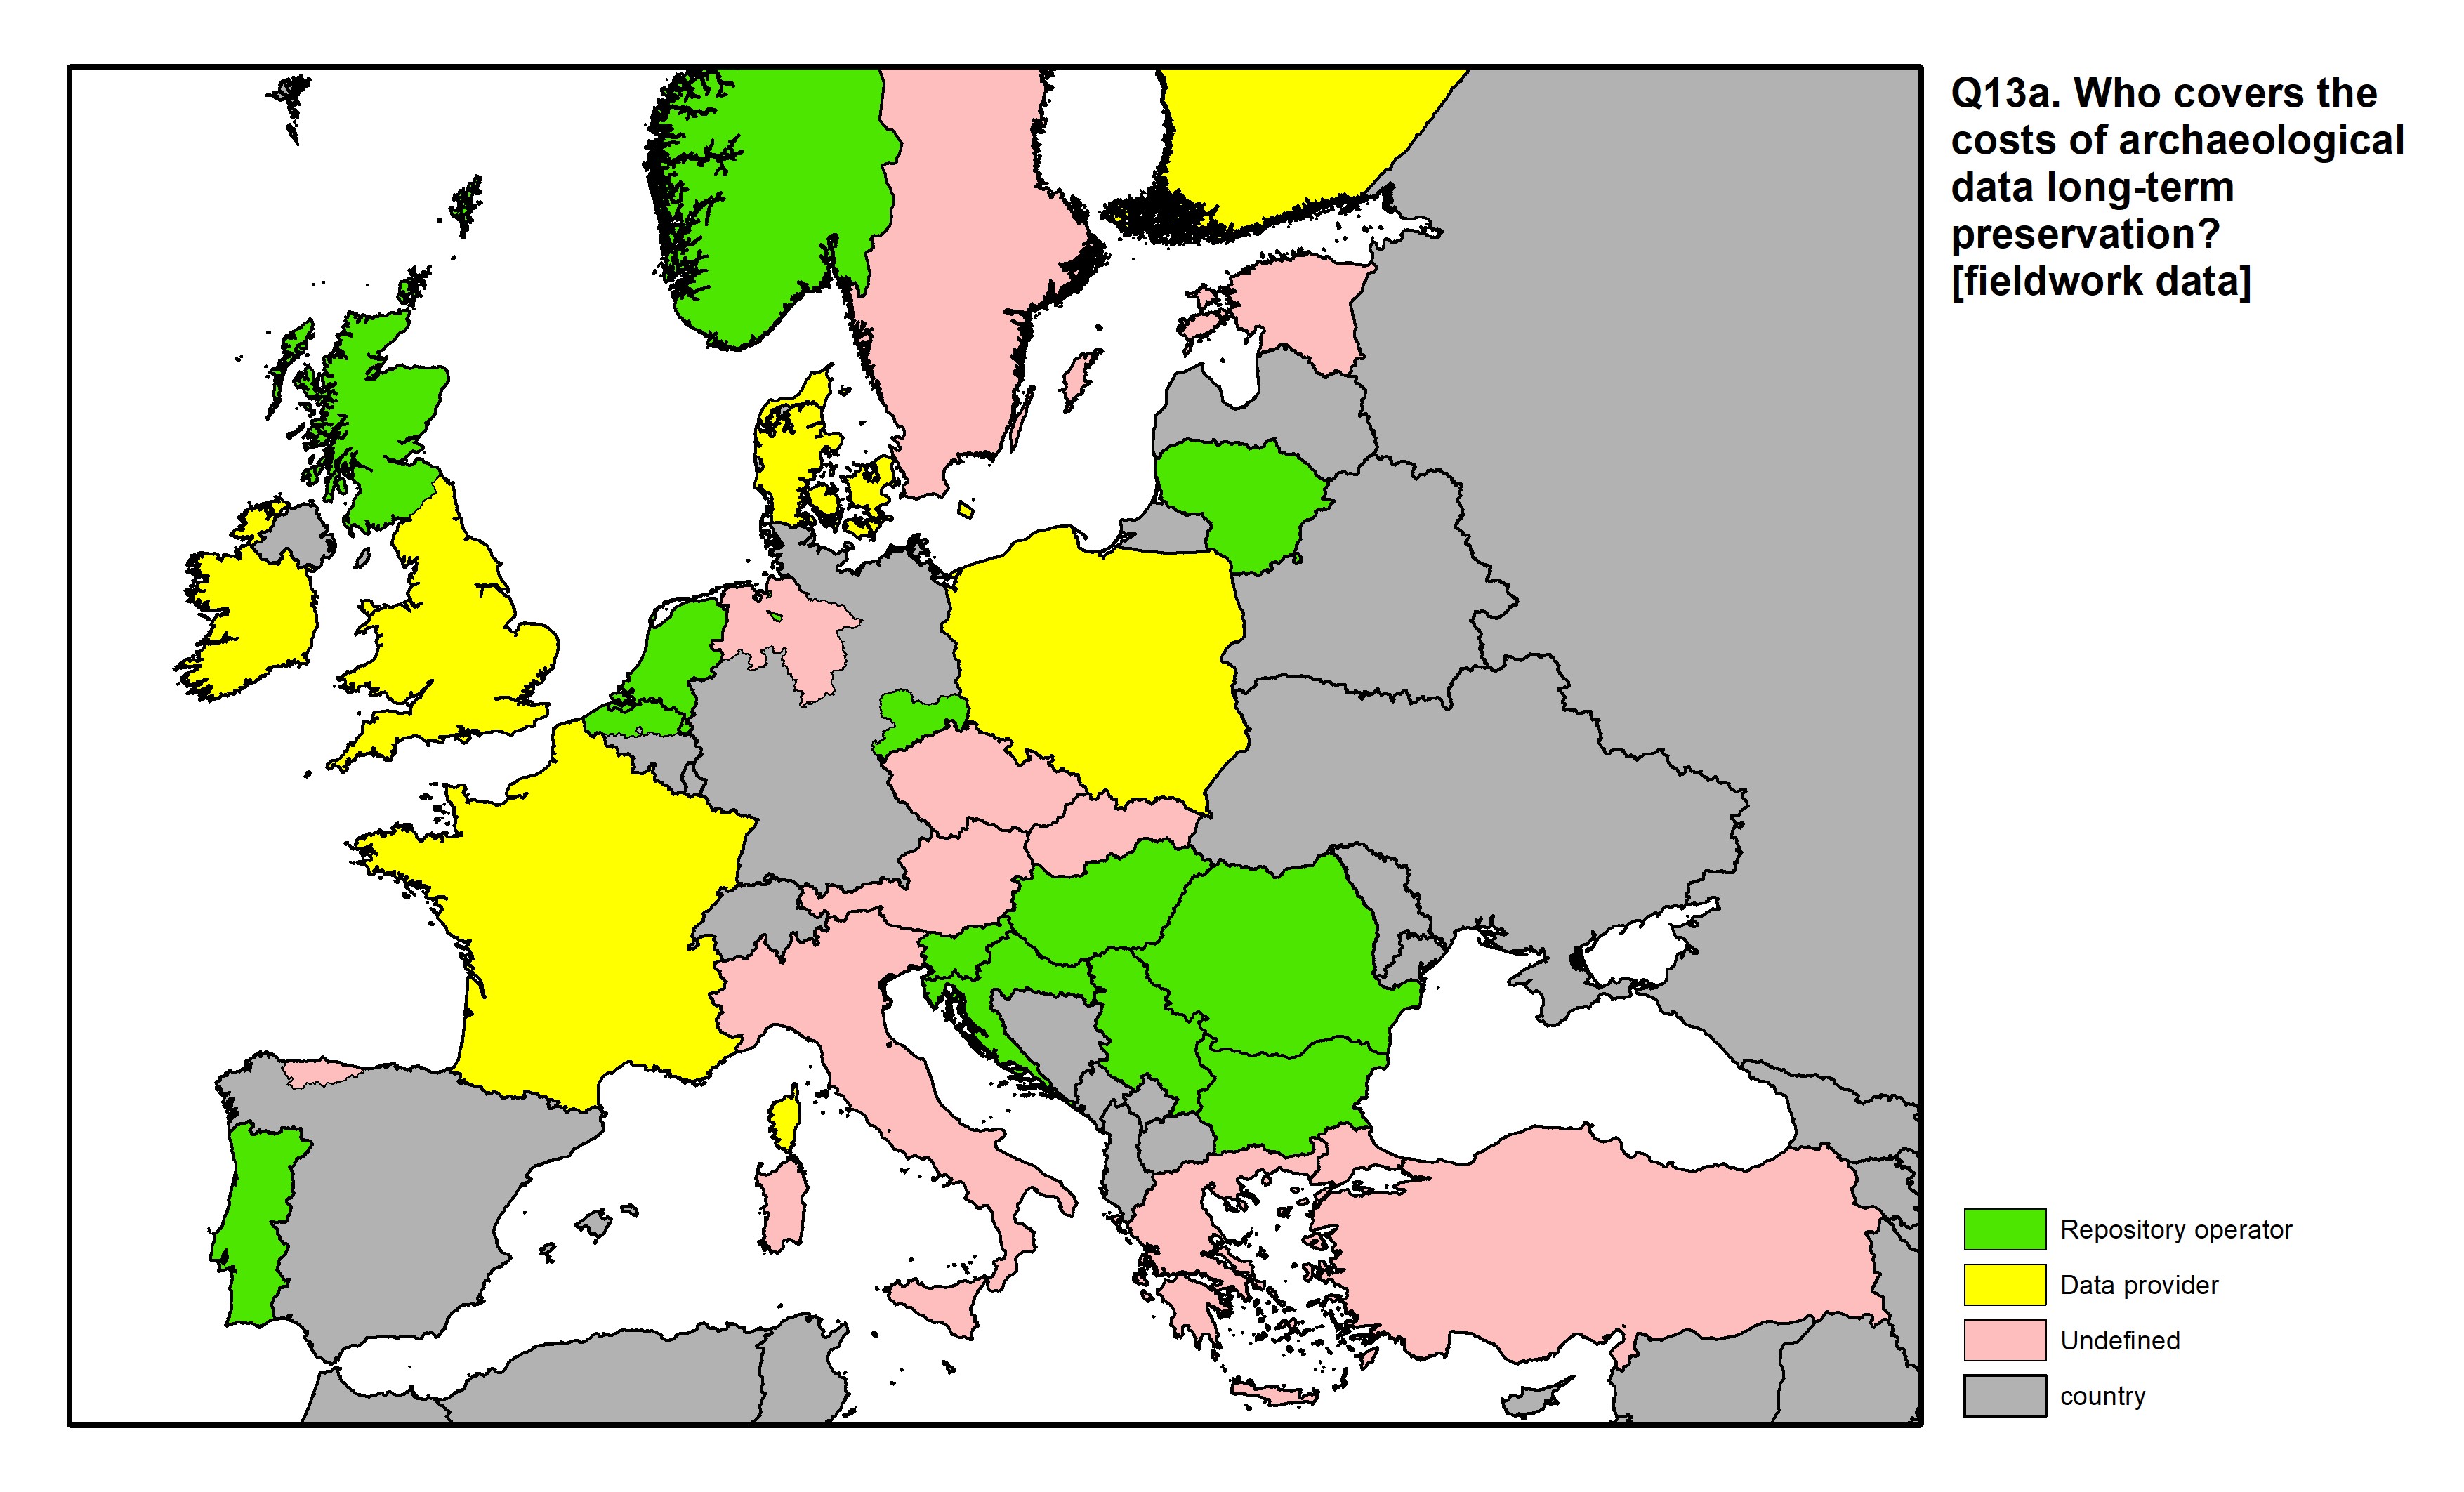 Figure 43: a map of Europe showing countries and regions in colour based on response rates to the survey question.